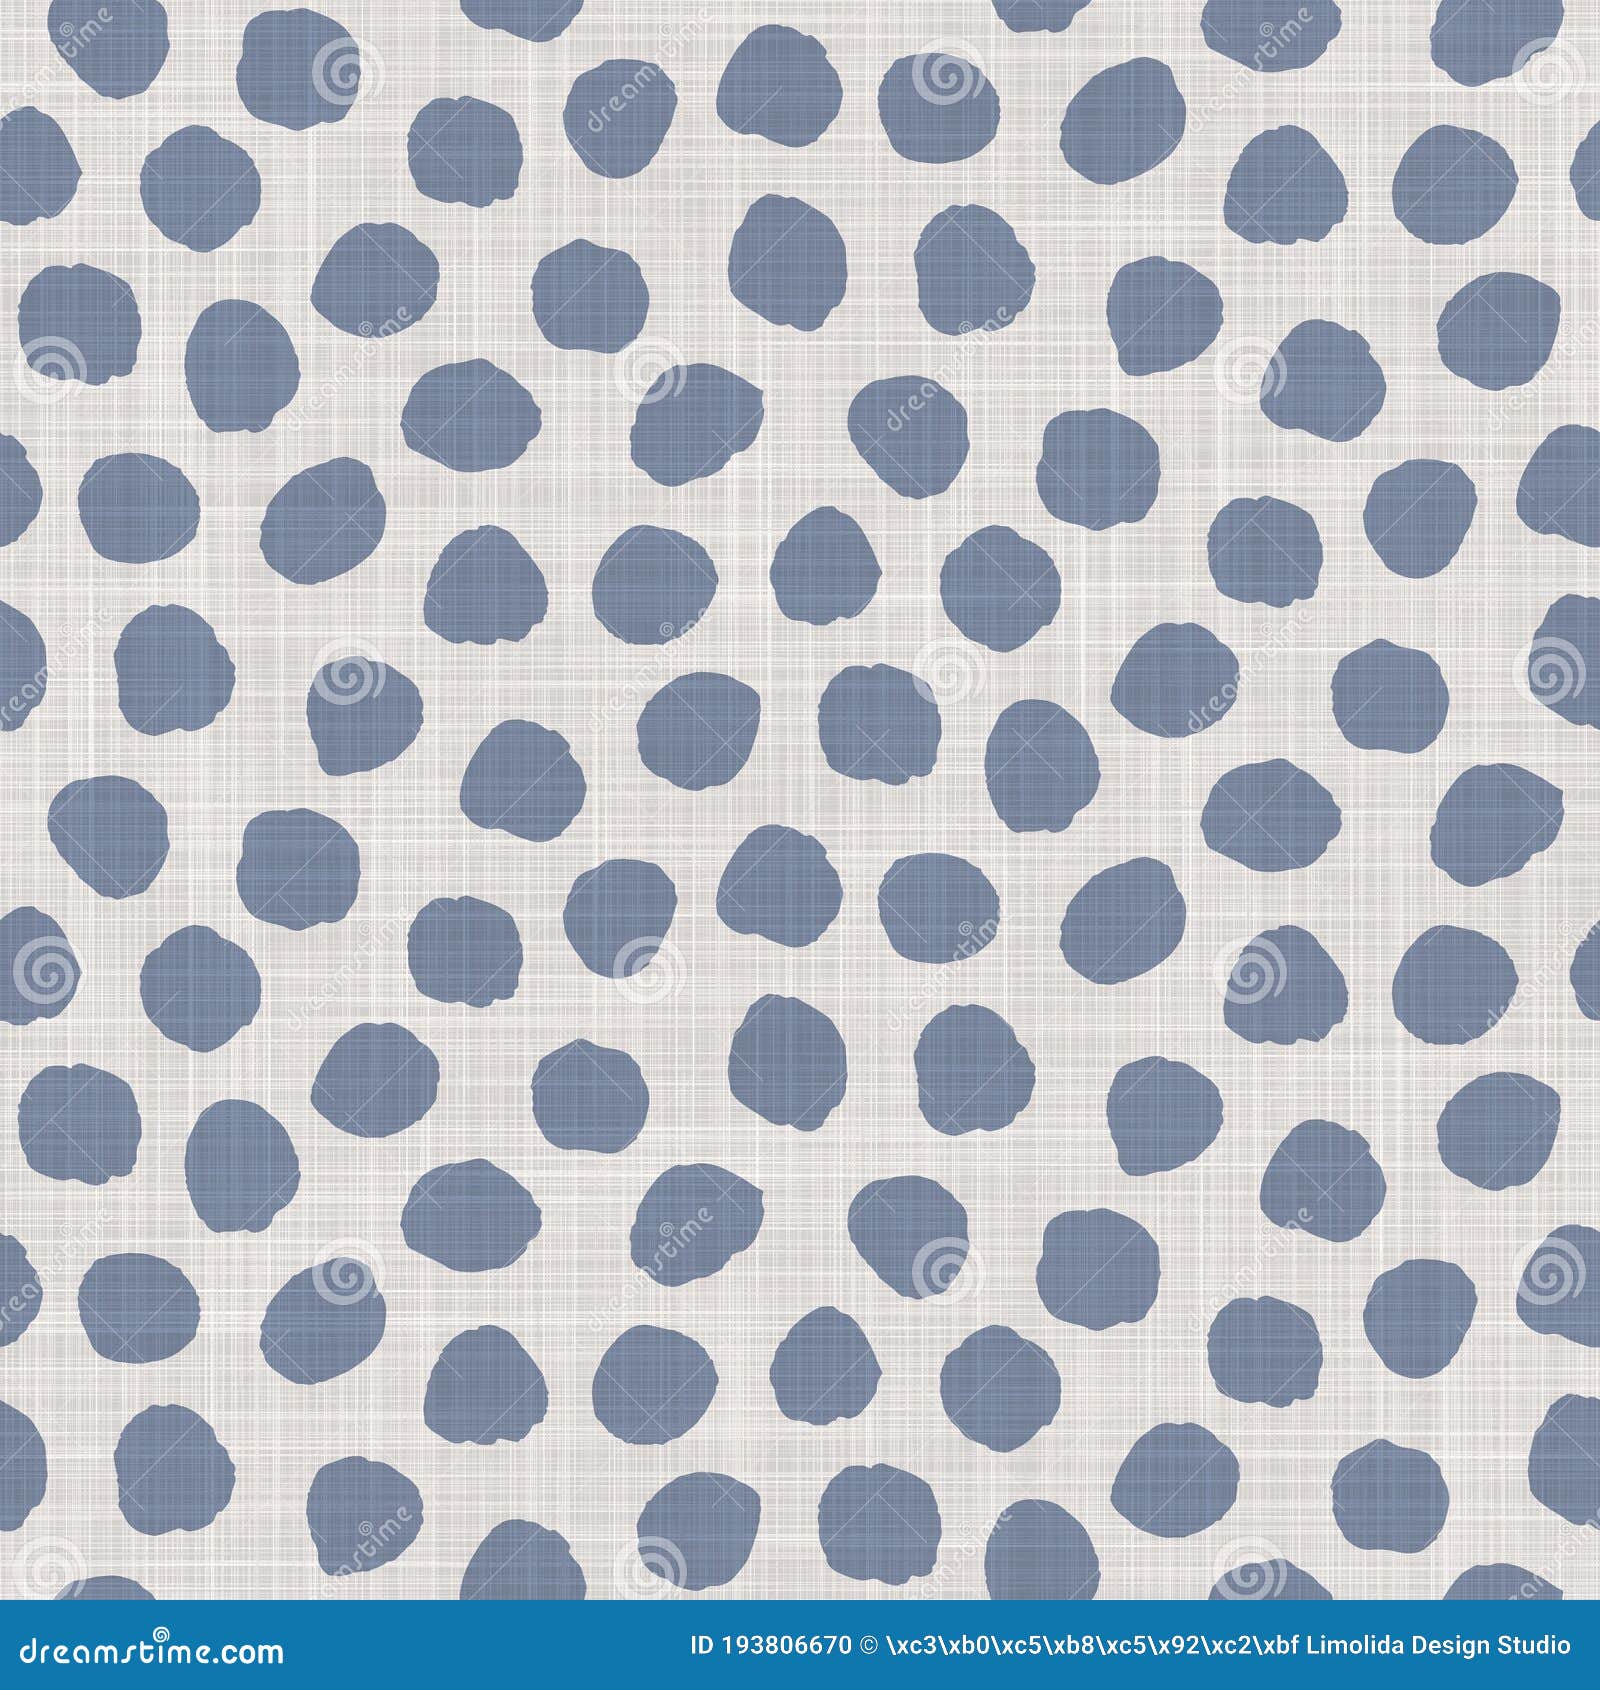 Seamless French Farmhouse Dotty Linen Pattern. Provence Blue White Woven  Texture. Shabby Chic Style Decorative Circle Stock Photo - Image of nature,  allover: 193806670